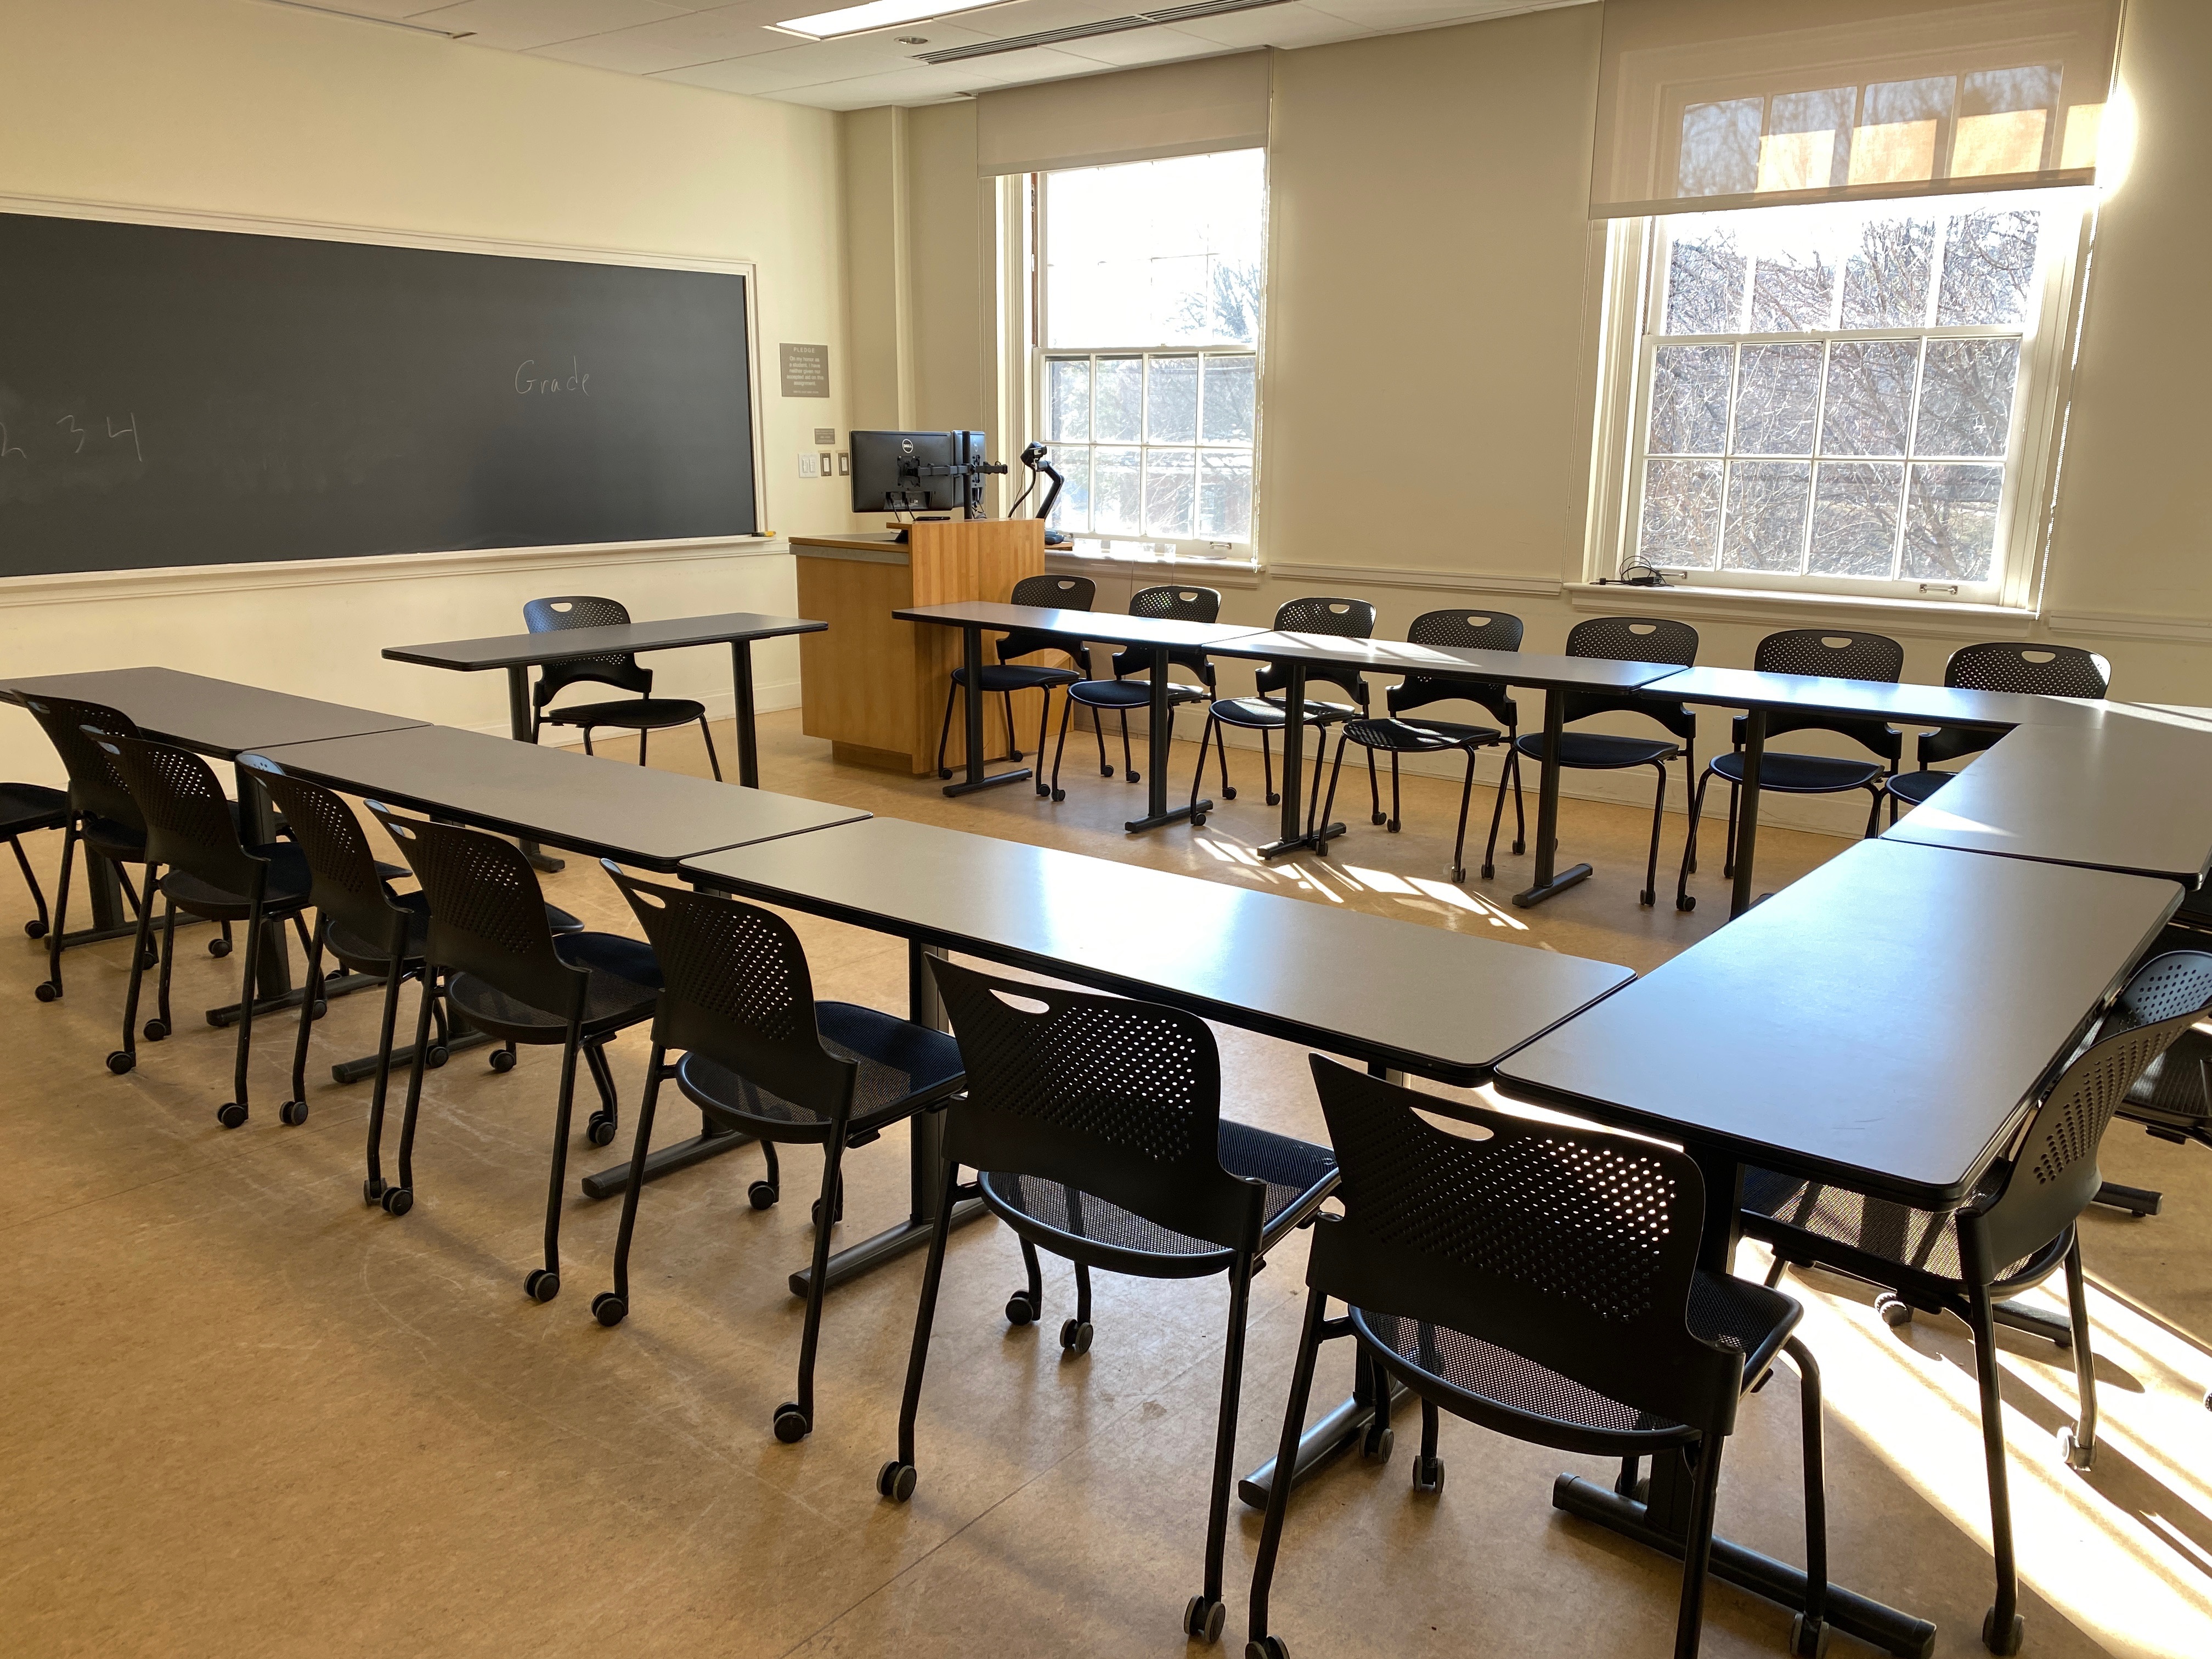 Picture of Cabell 407 classroom